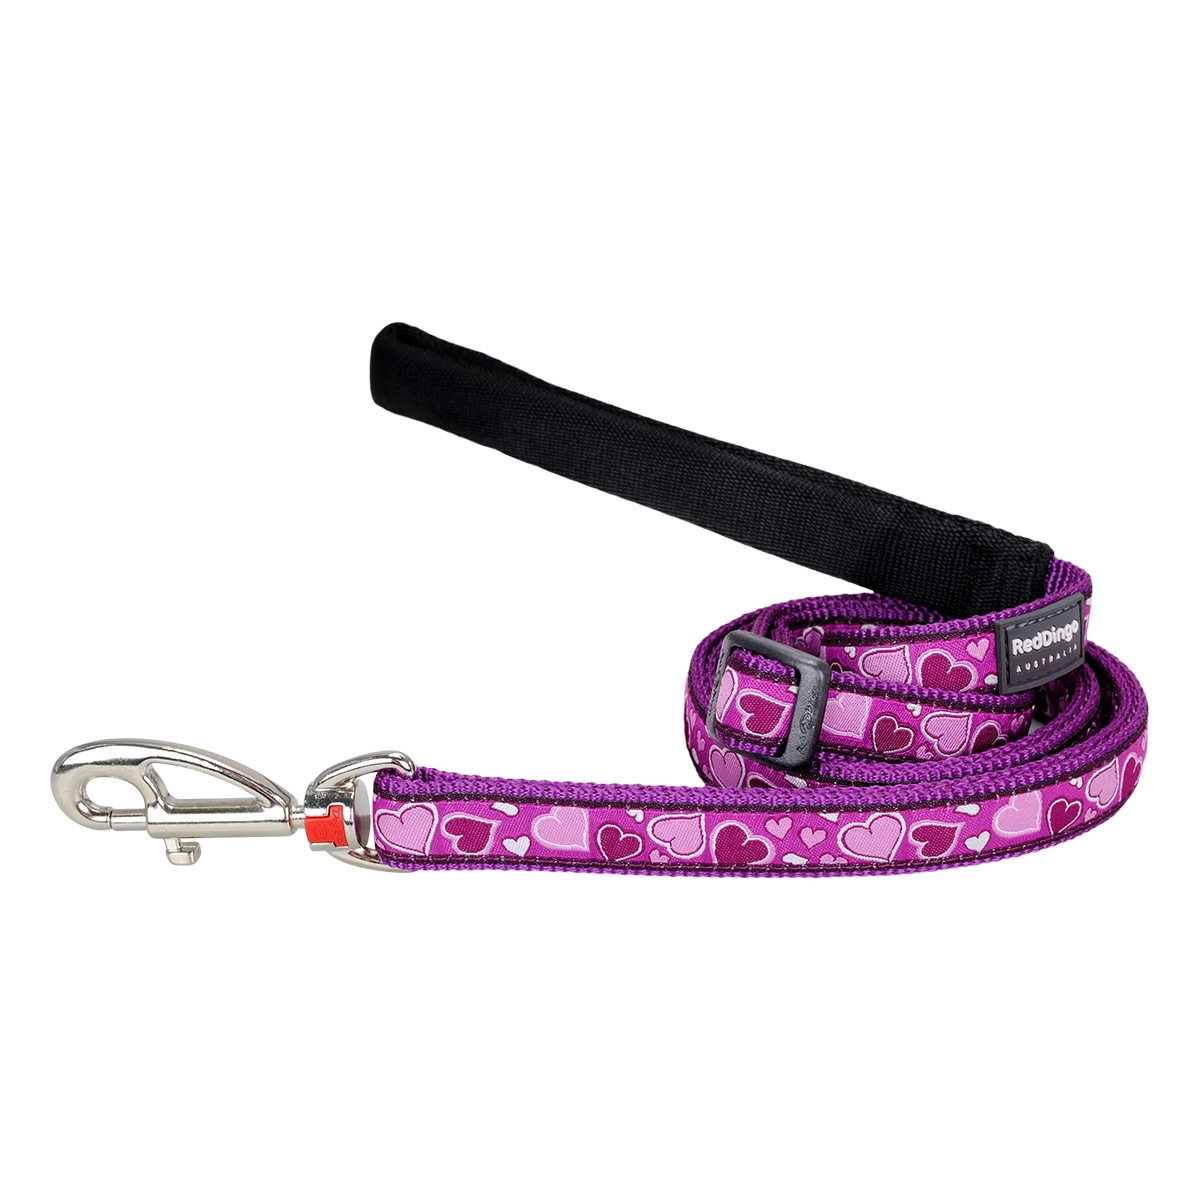 Picture of Red Dingo L6-BZ-PU-15 Dog Lead Design Breezy Love Purple - Small 6ft